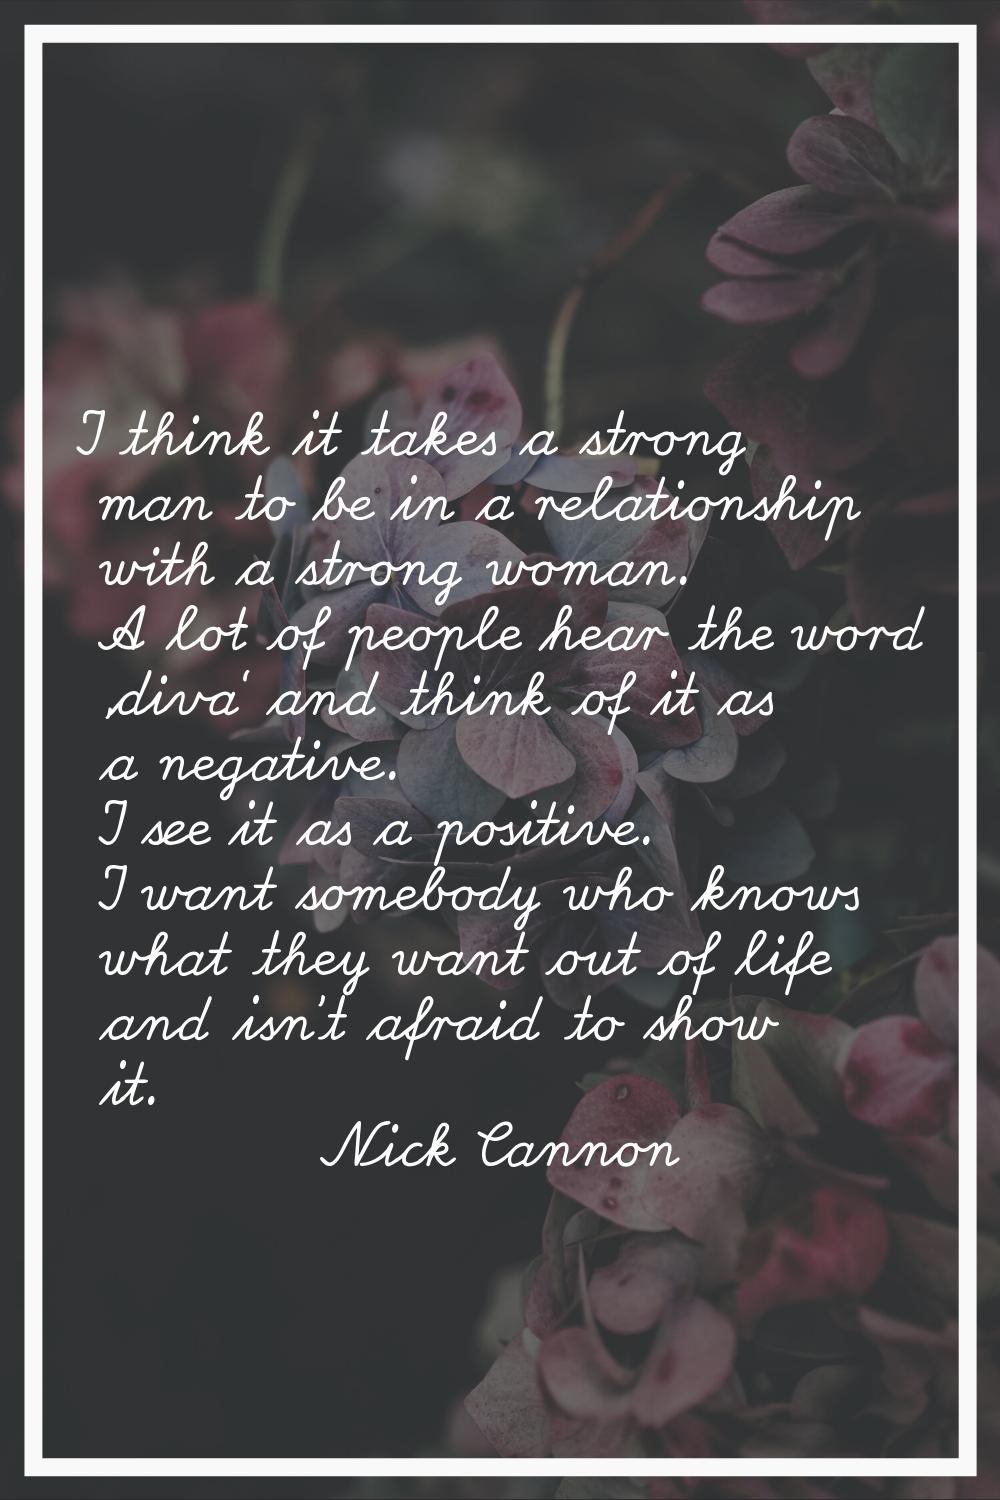 I think it takes a strong man to be in a relationship with a strong woman. A lot of people hear the